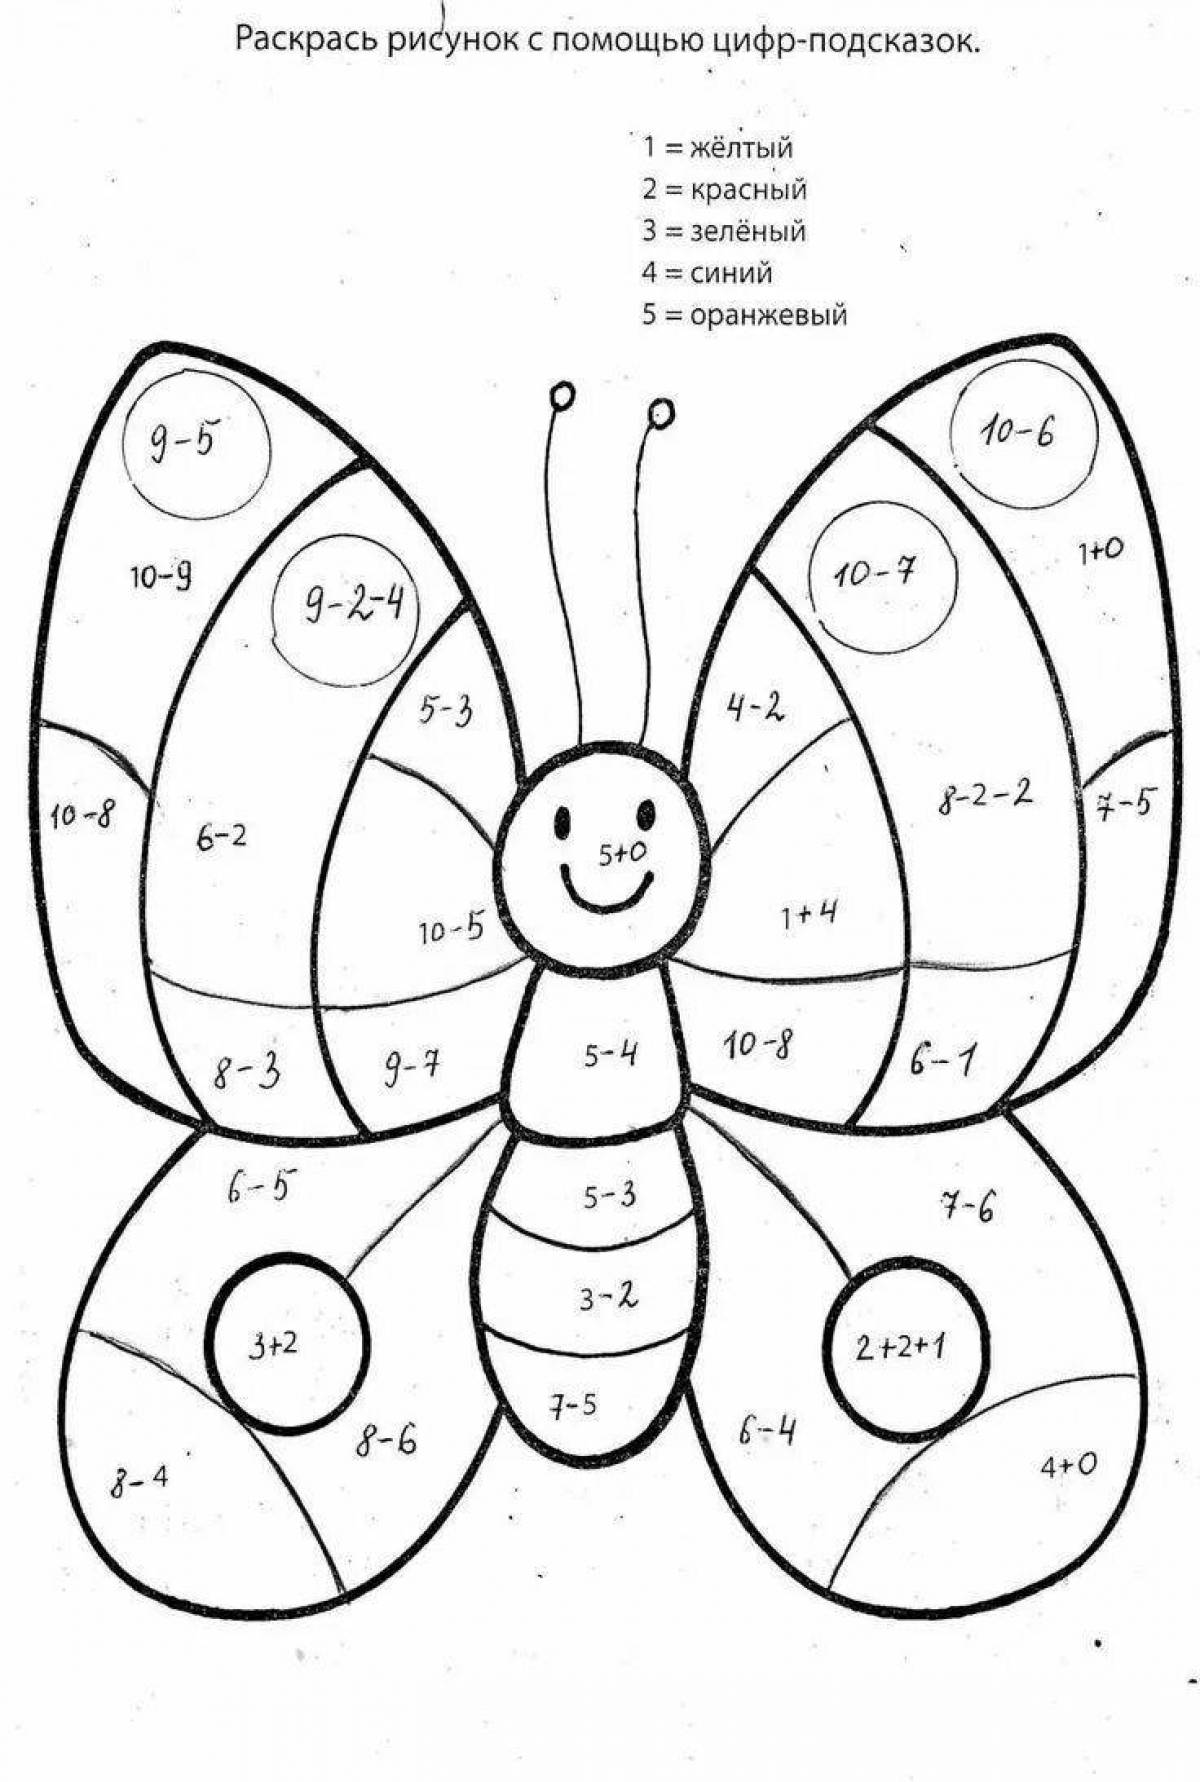 Creative math coloring book for 4-5 year olds